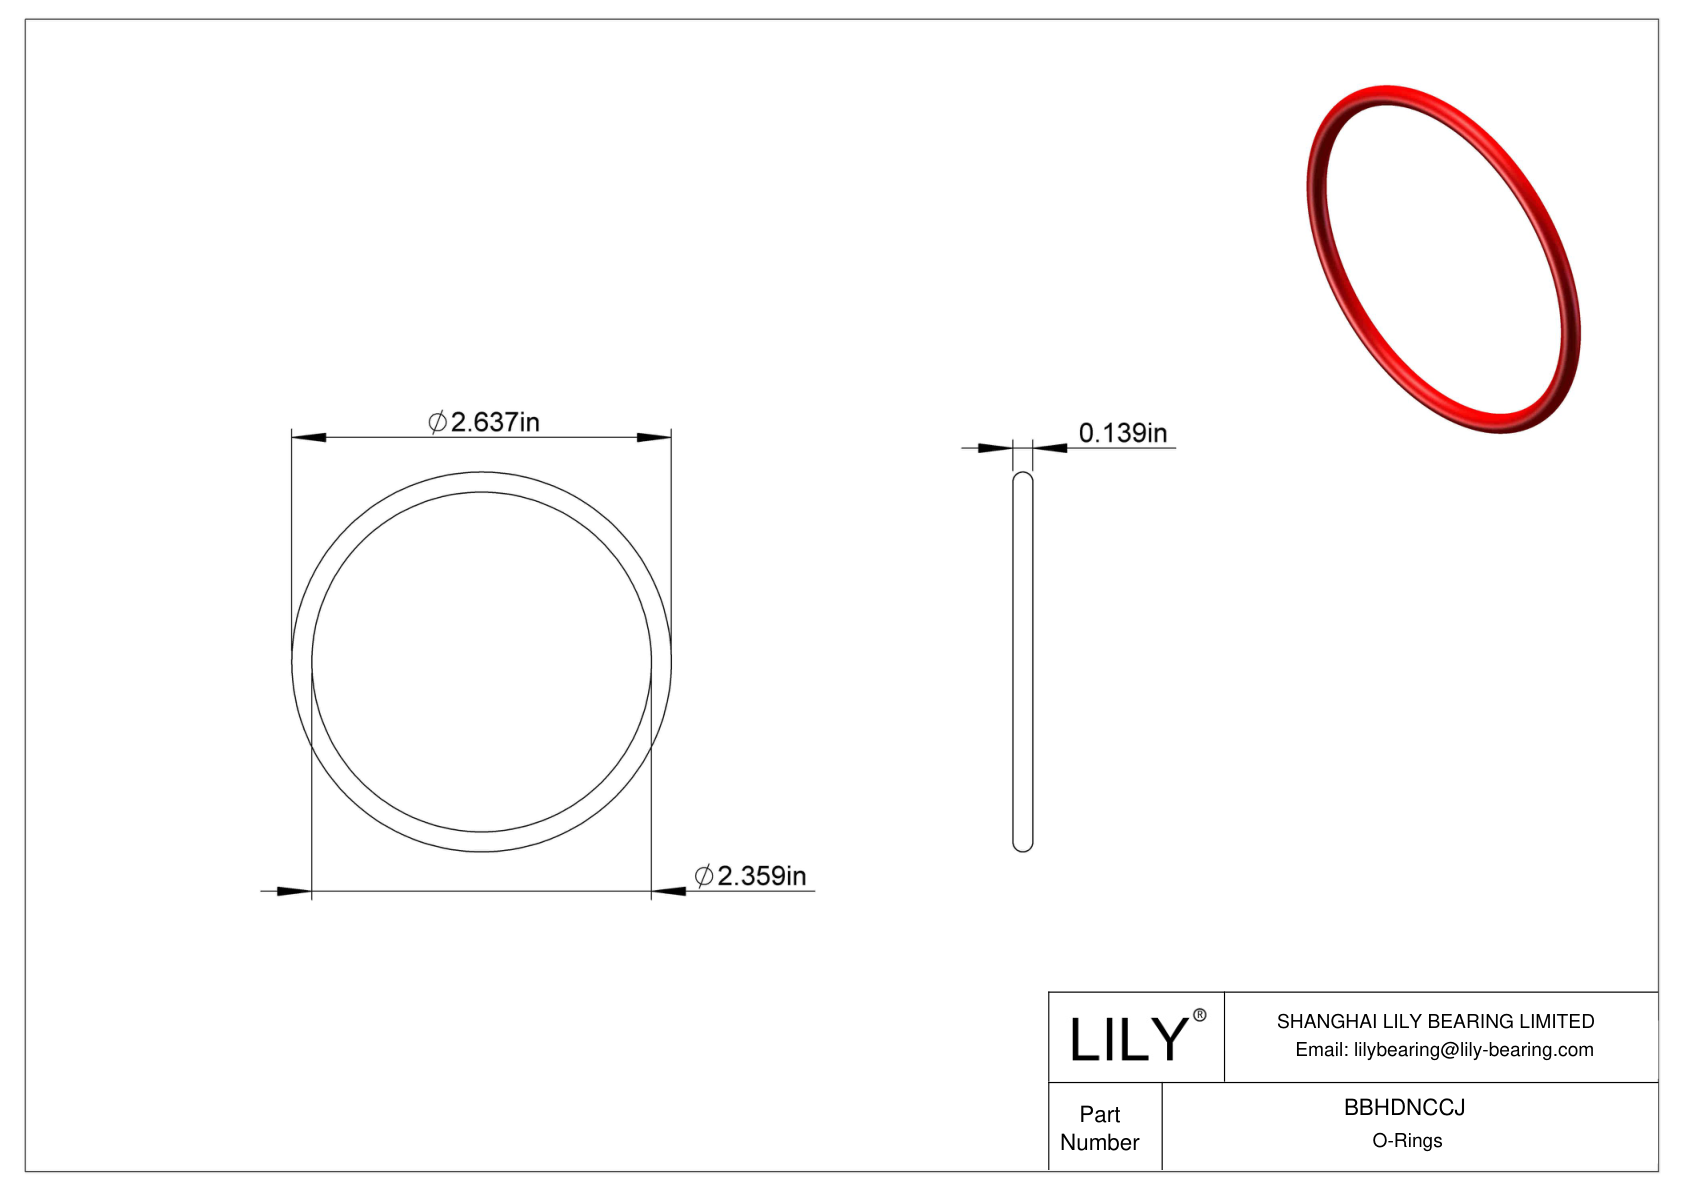 BBHDNCCJ High Temperature O-Rings Round cad drawing